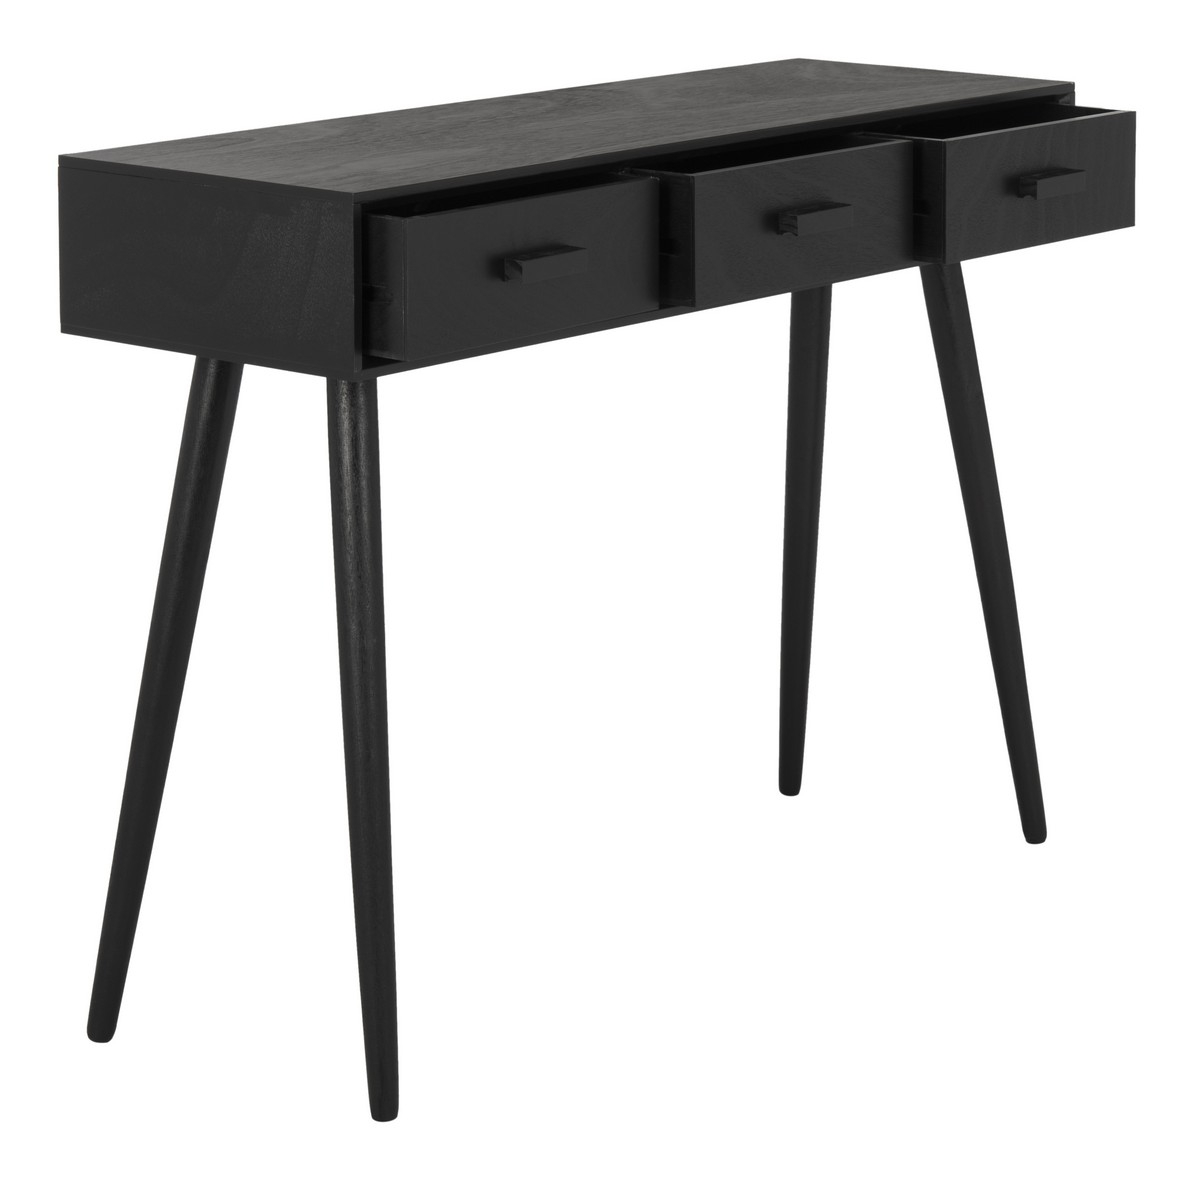 Albus 3 Drawer Console Table - Black - Arlo Home - Image 3